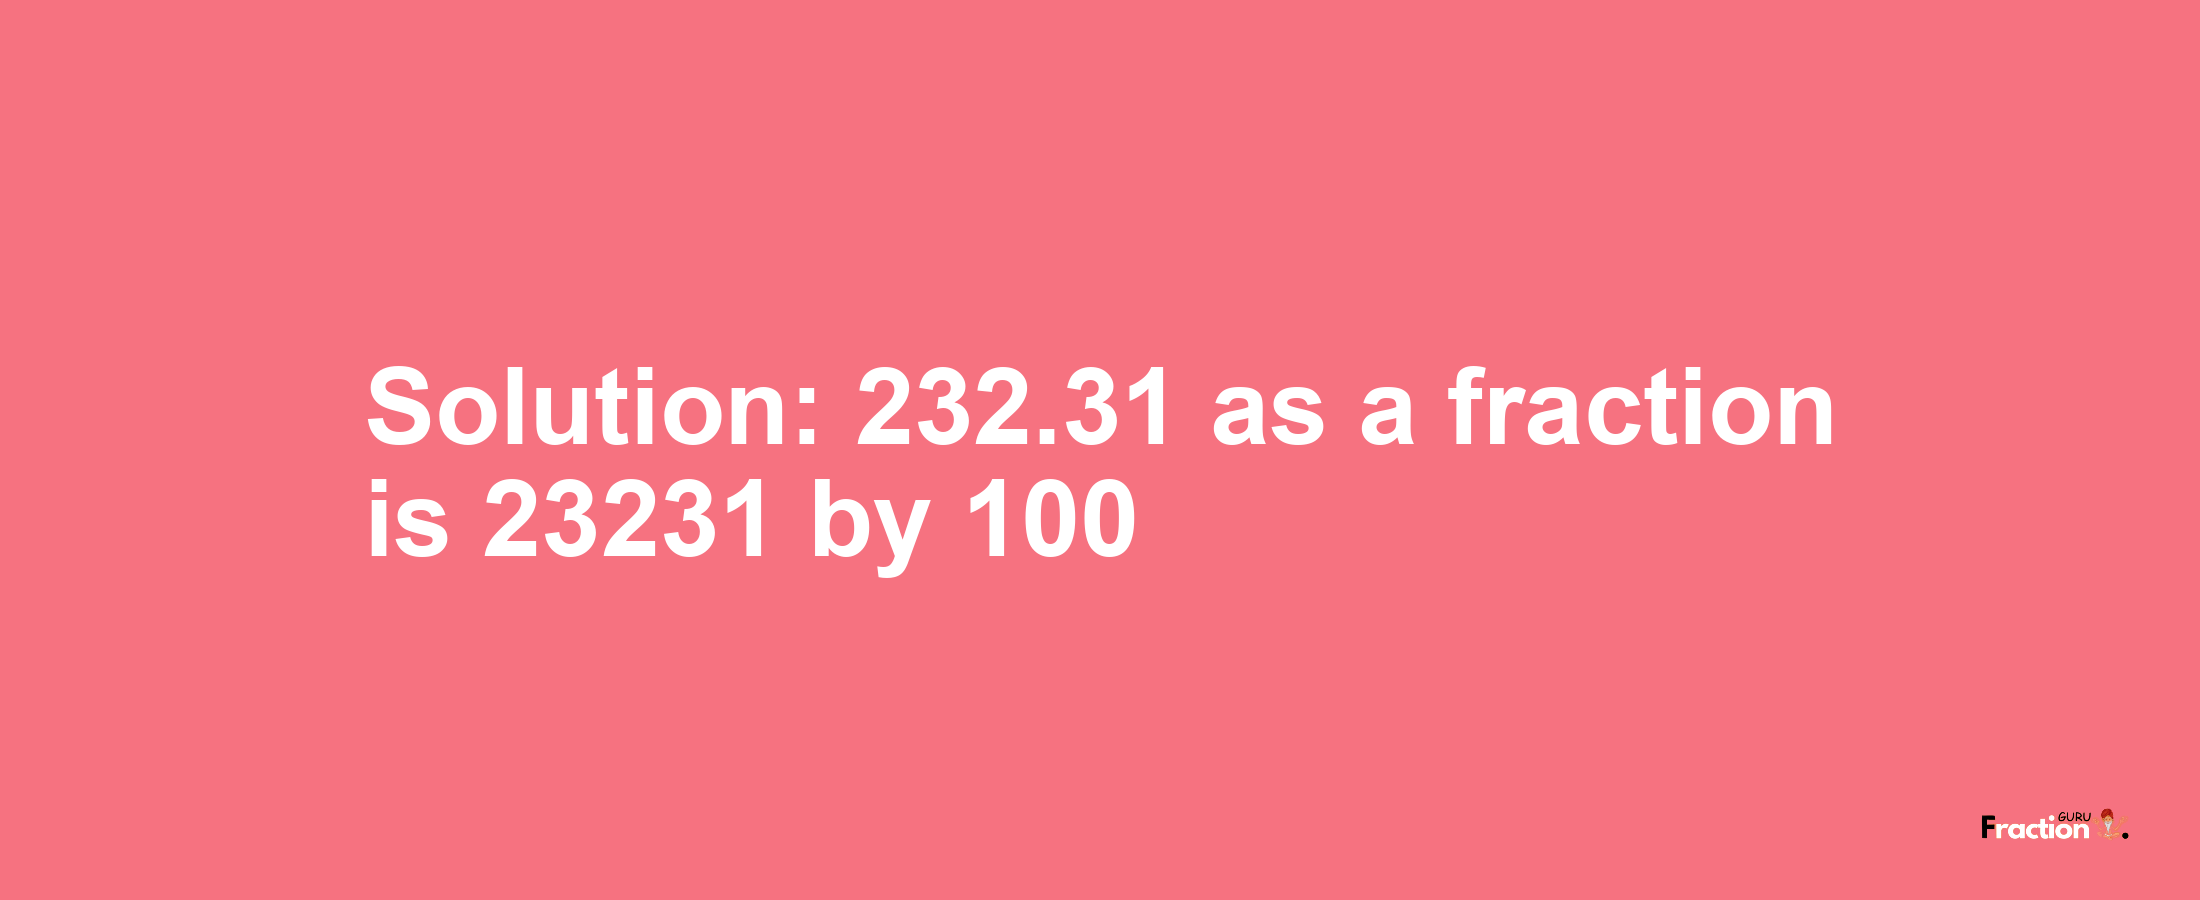 Solution:232.31 as a fraction is 23231/100